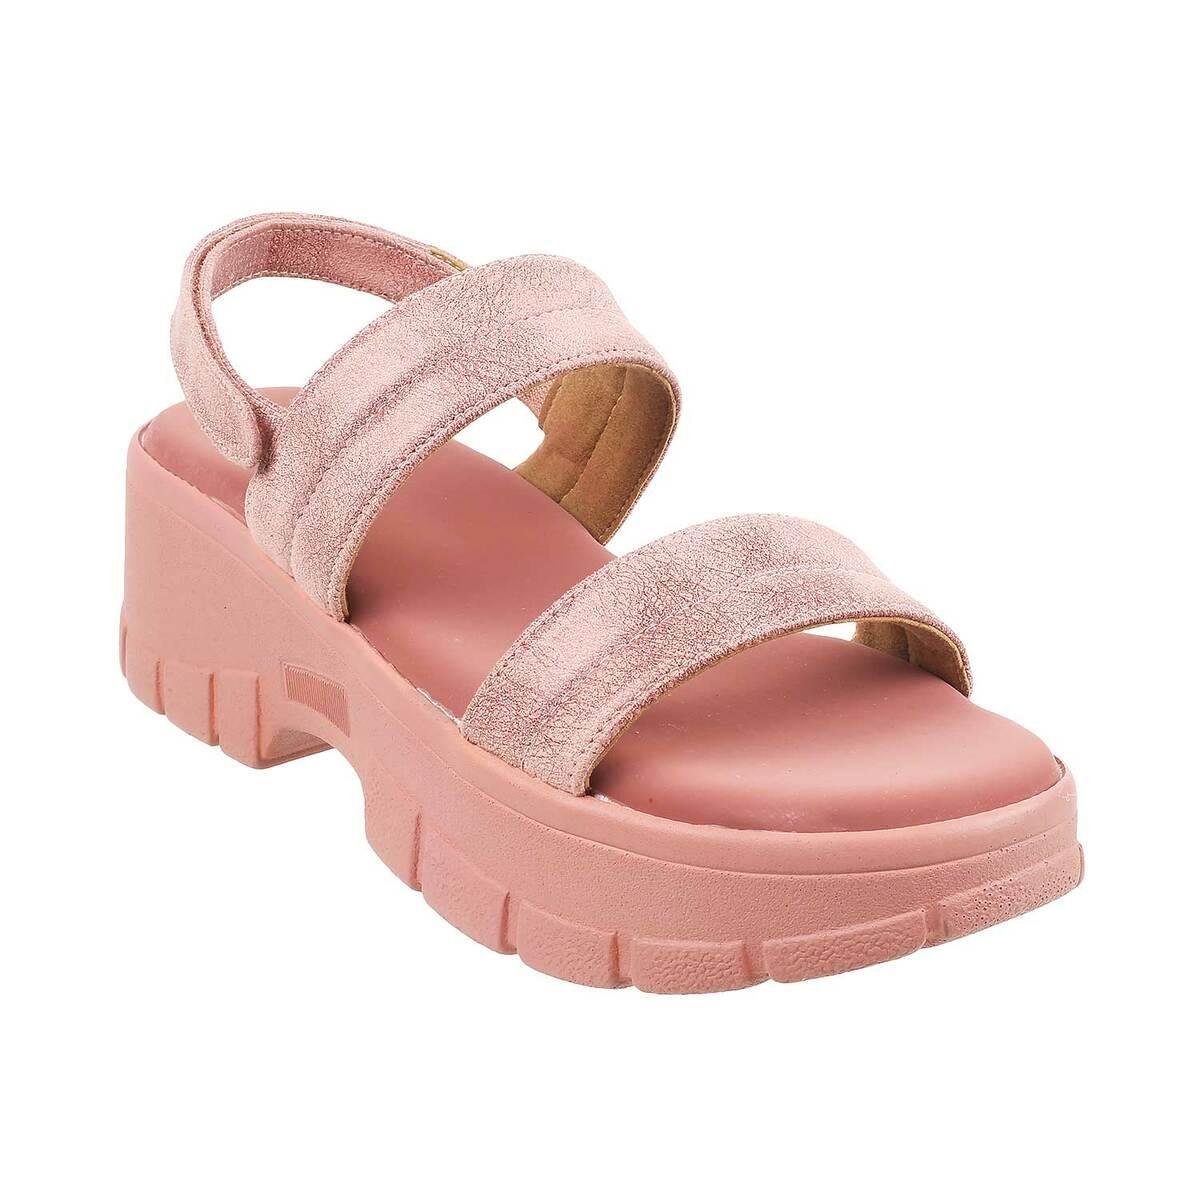 Womens Summer Casual Peep Toe Platform Sandals Non Slip Rubber Sole Buckle  Elegant Heels From You06, $16.41 | DHgate.Com